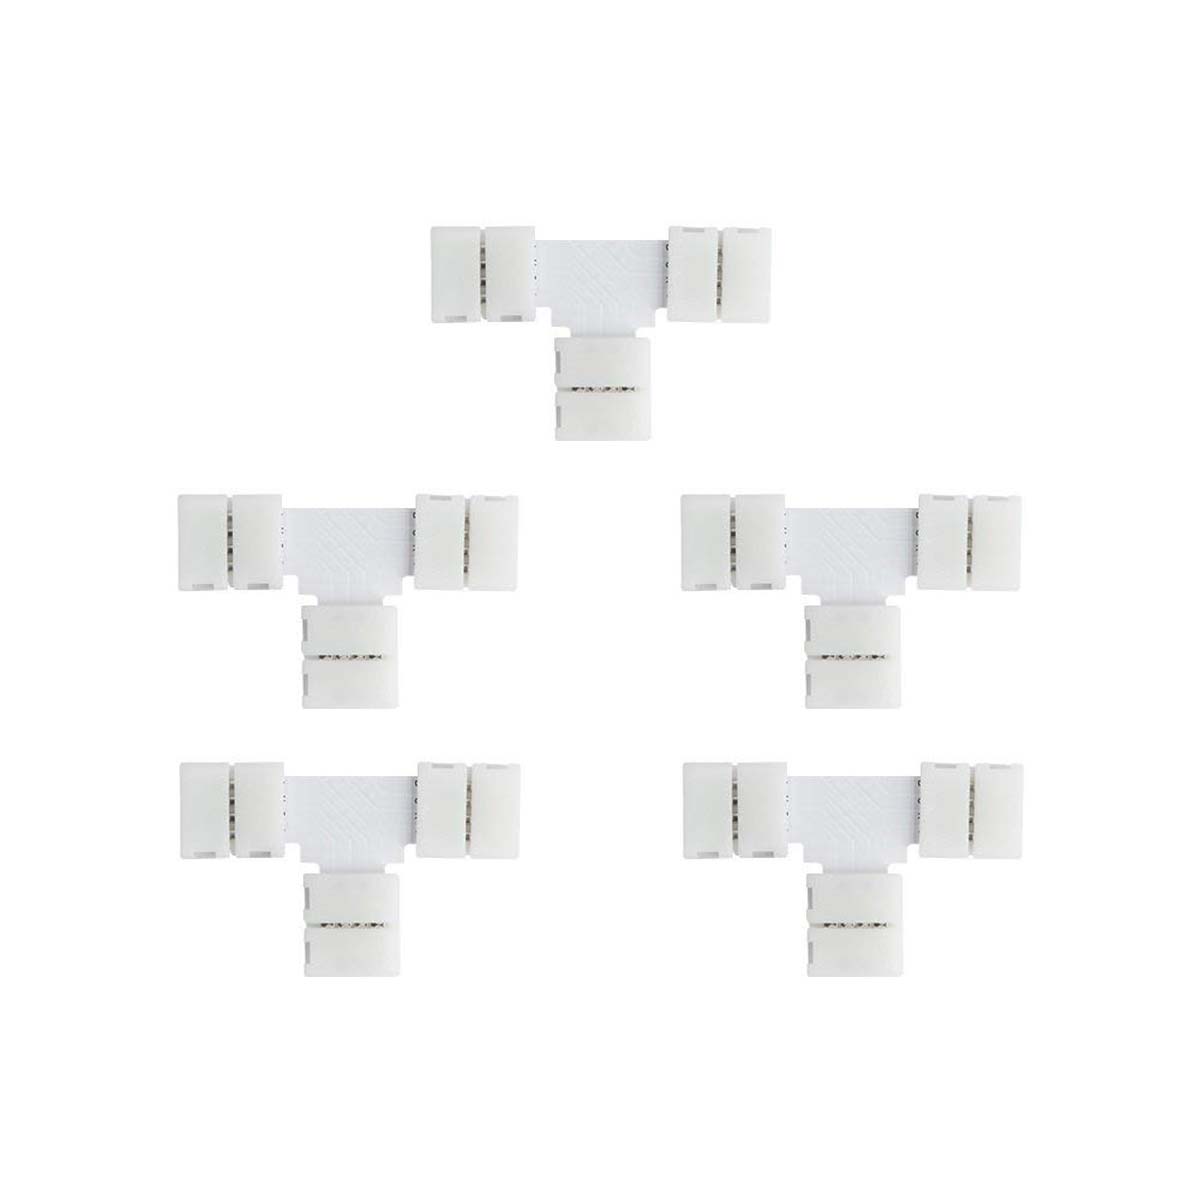 G.W.S LED Wholesale Strip Connectors 10mm / 5 4 Pin T Shape Connector For 5050 LED RGB Strip Lights